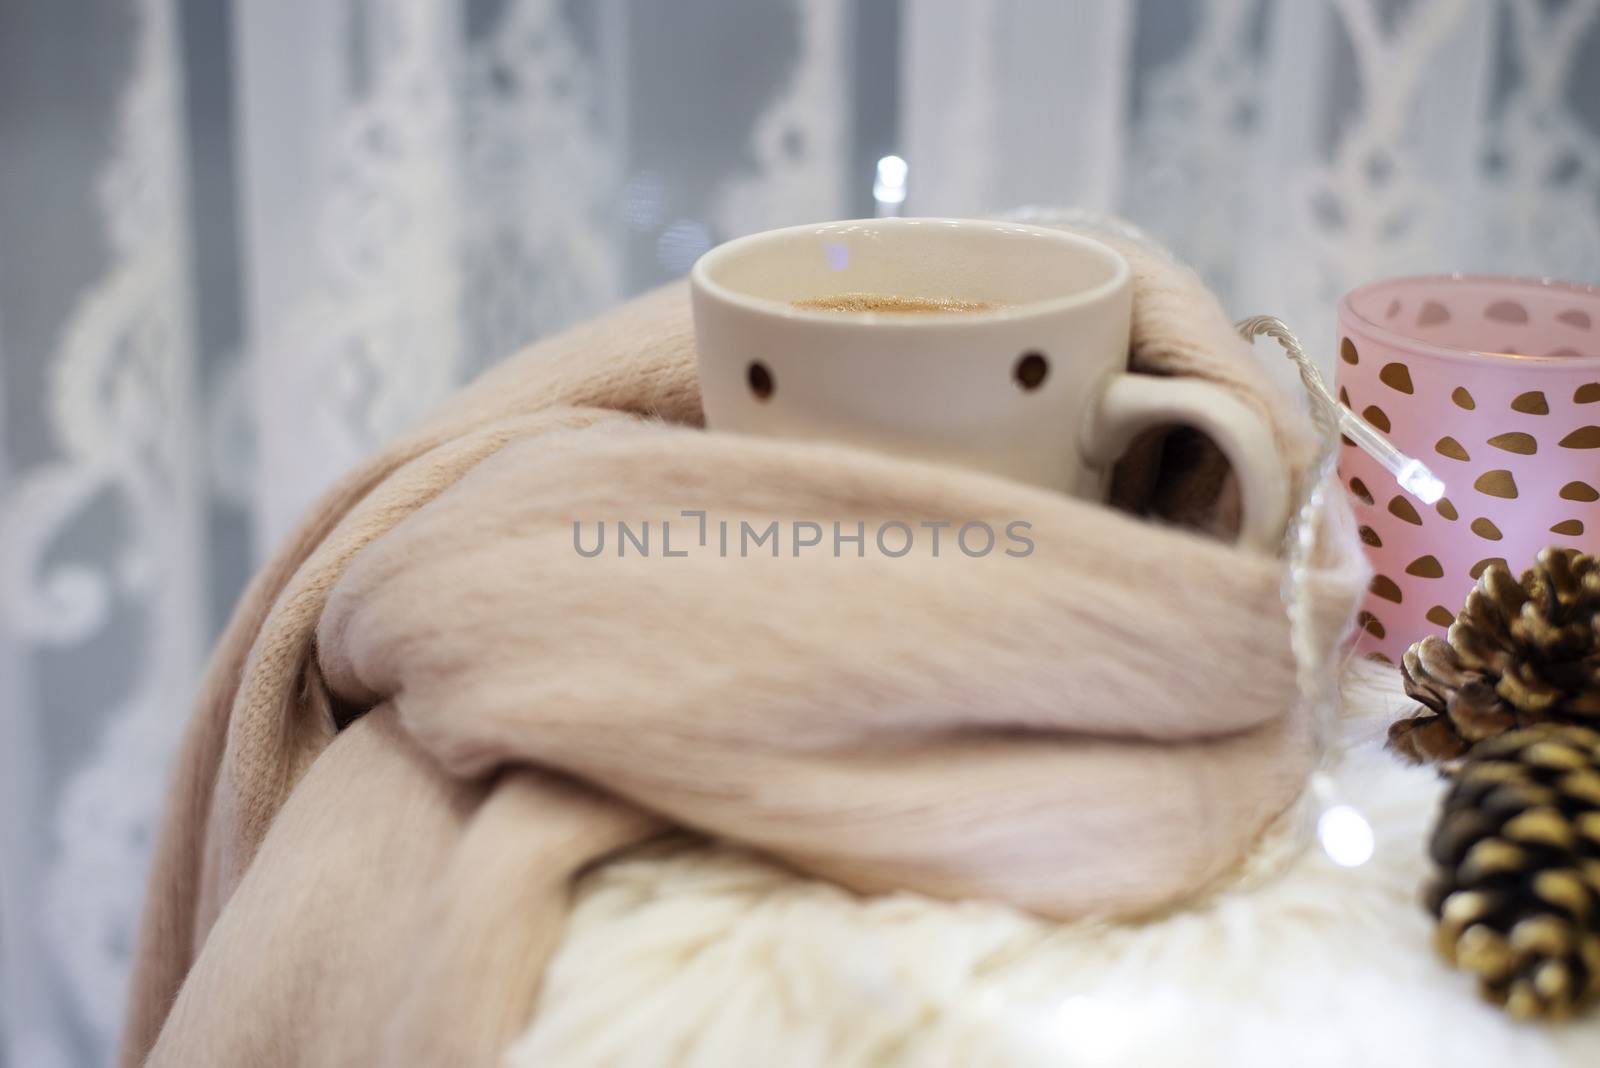 Hot chocolate, a cup of cappuccino on a fur chair in front of a large window with a white sheers curtain. Warm scarf, cones and lights around. Cozy winter evenings by sevda_stancheva